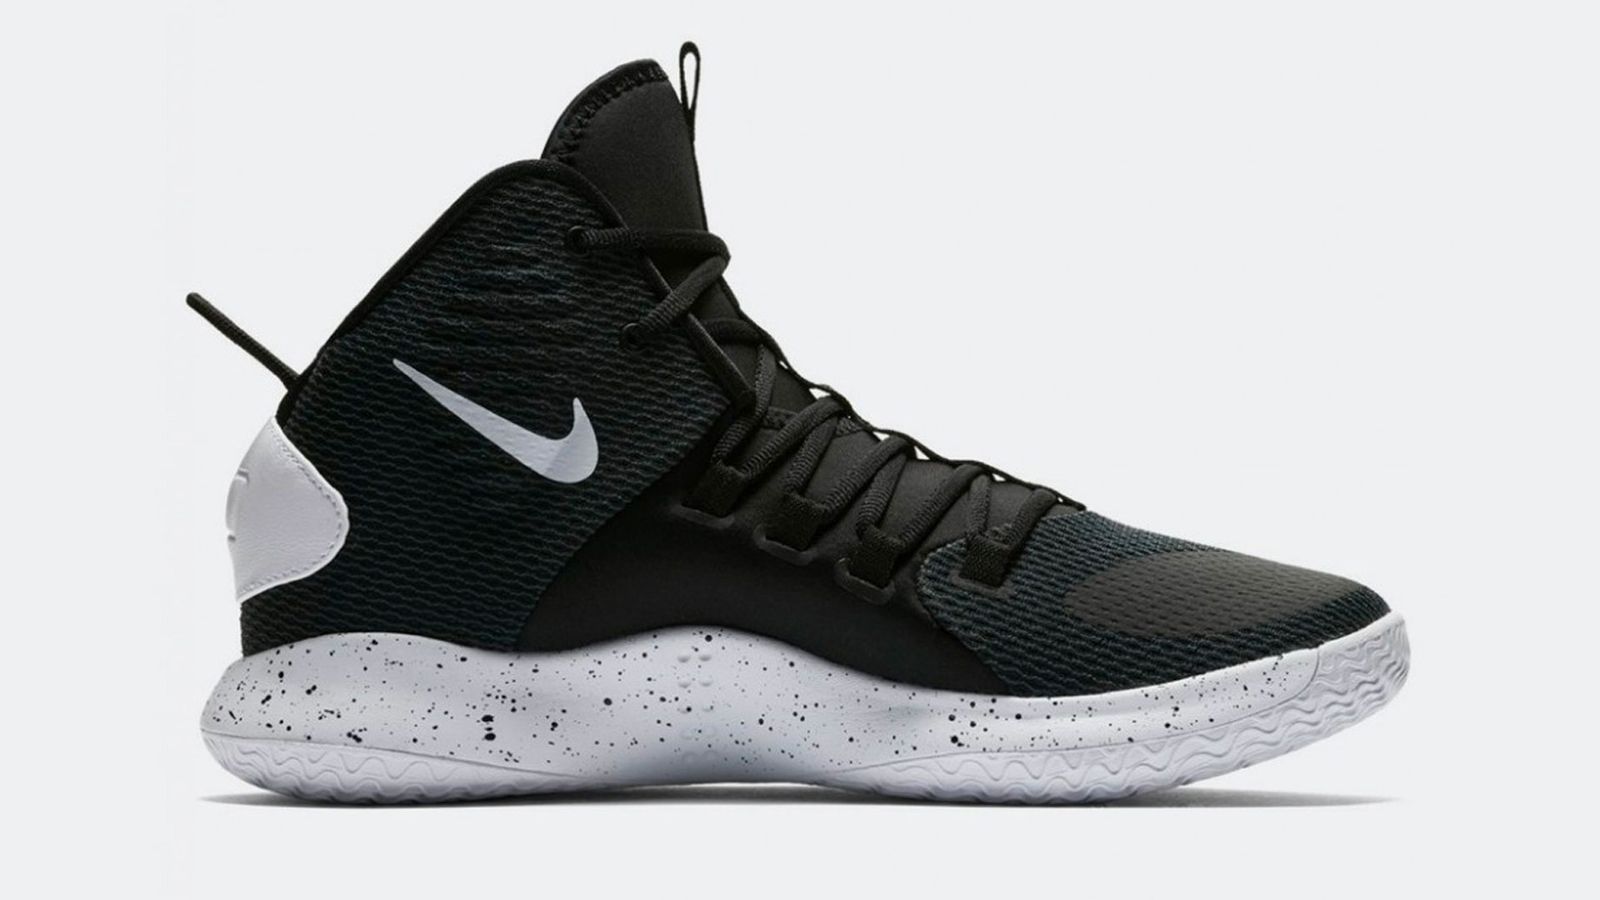 Nike Hyperdunk X product image of a black mesh sneaker with a white midsole.